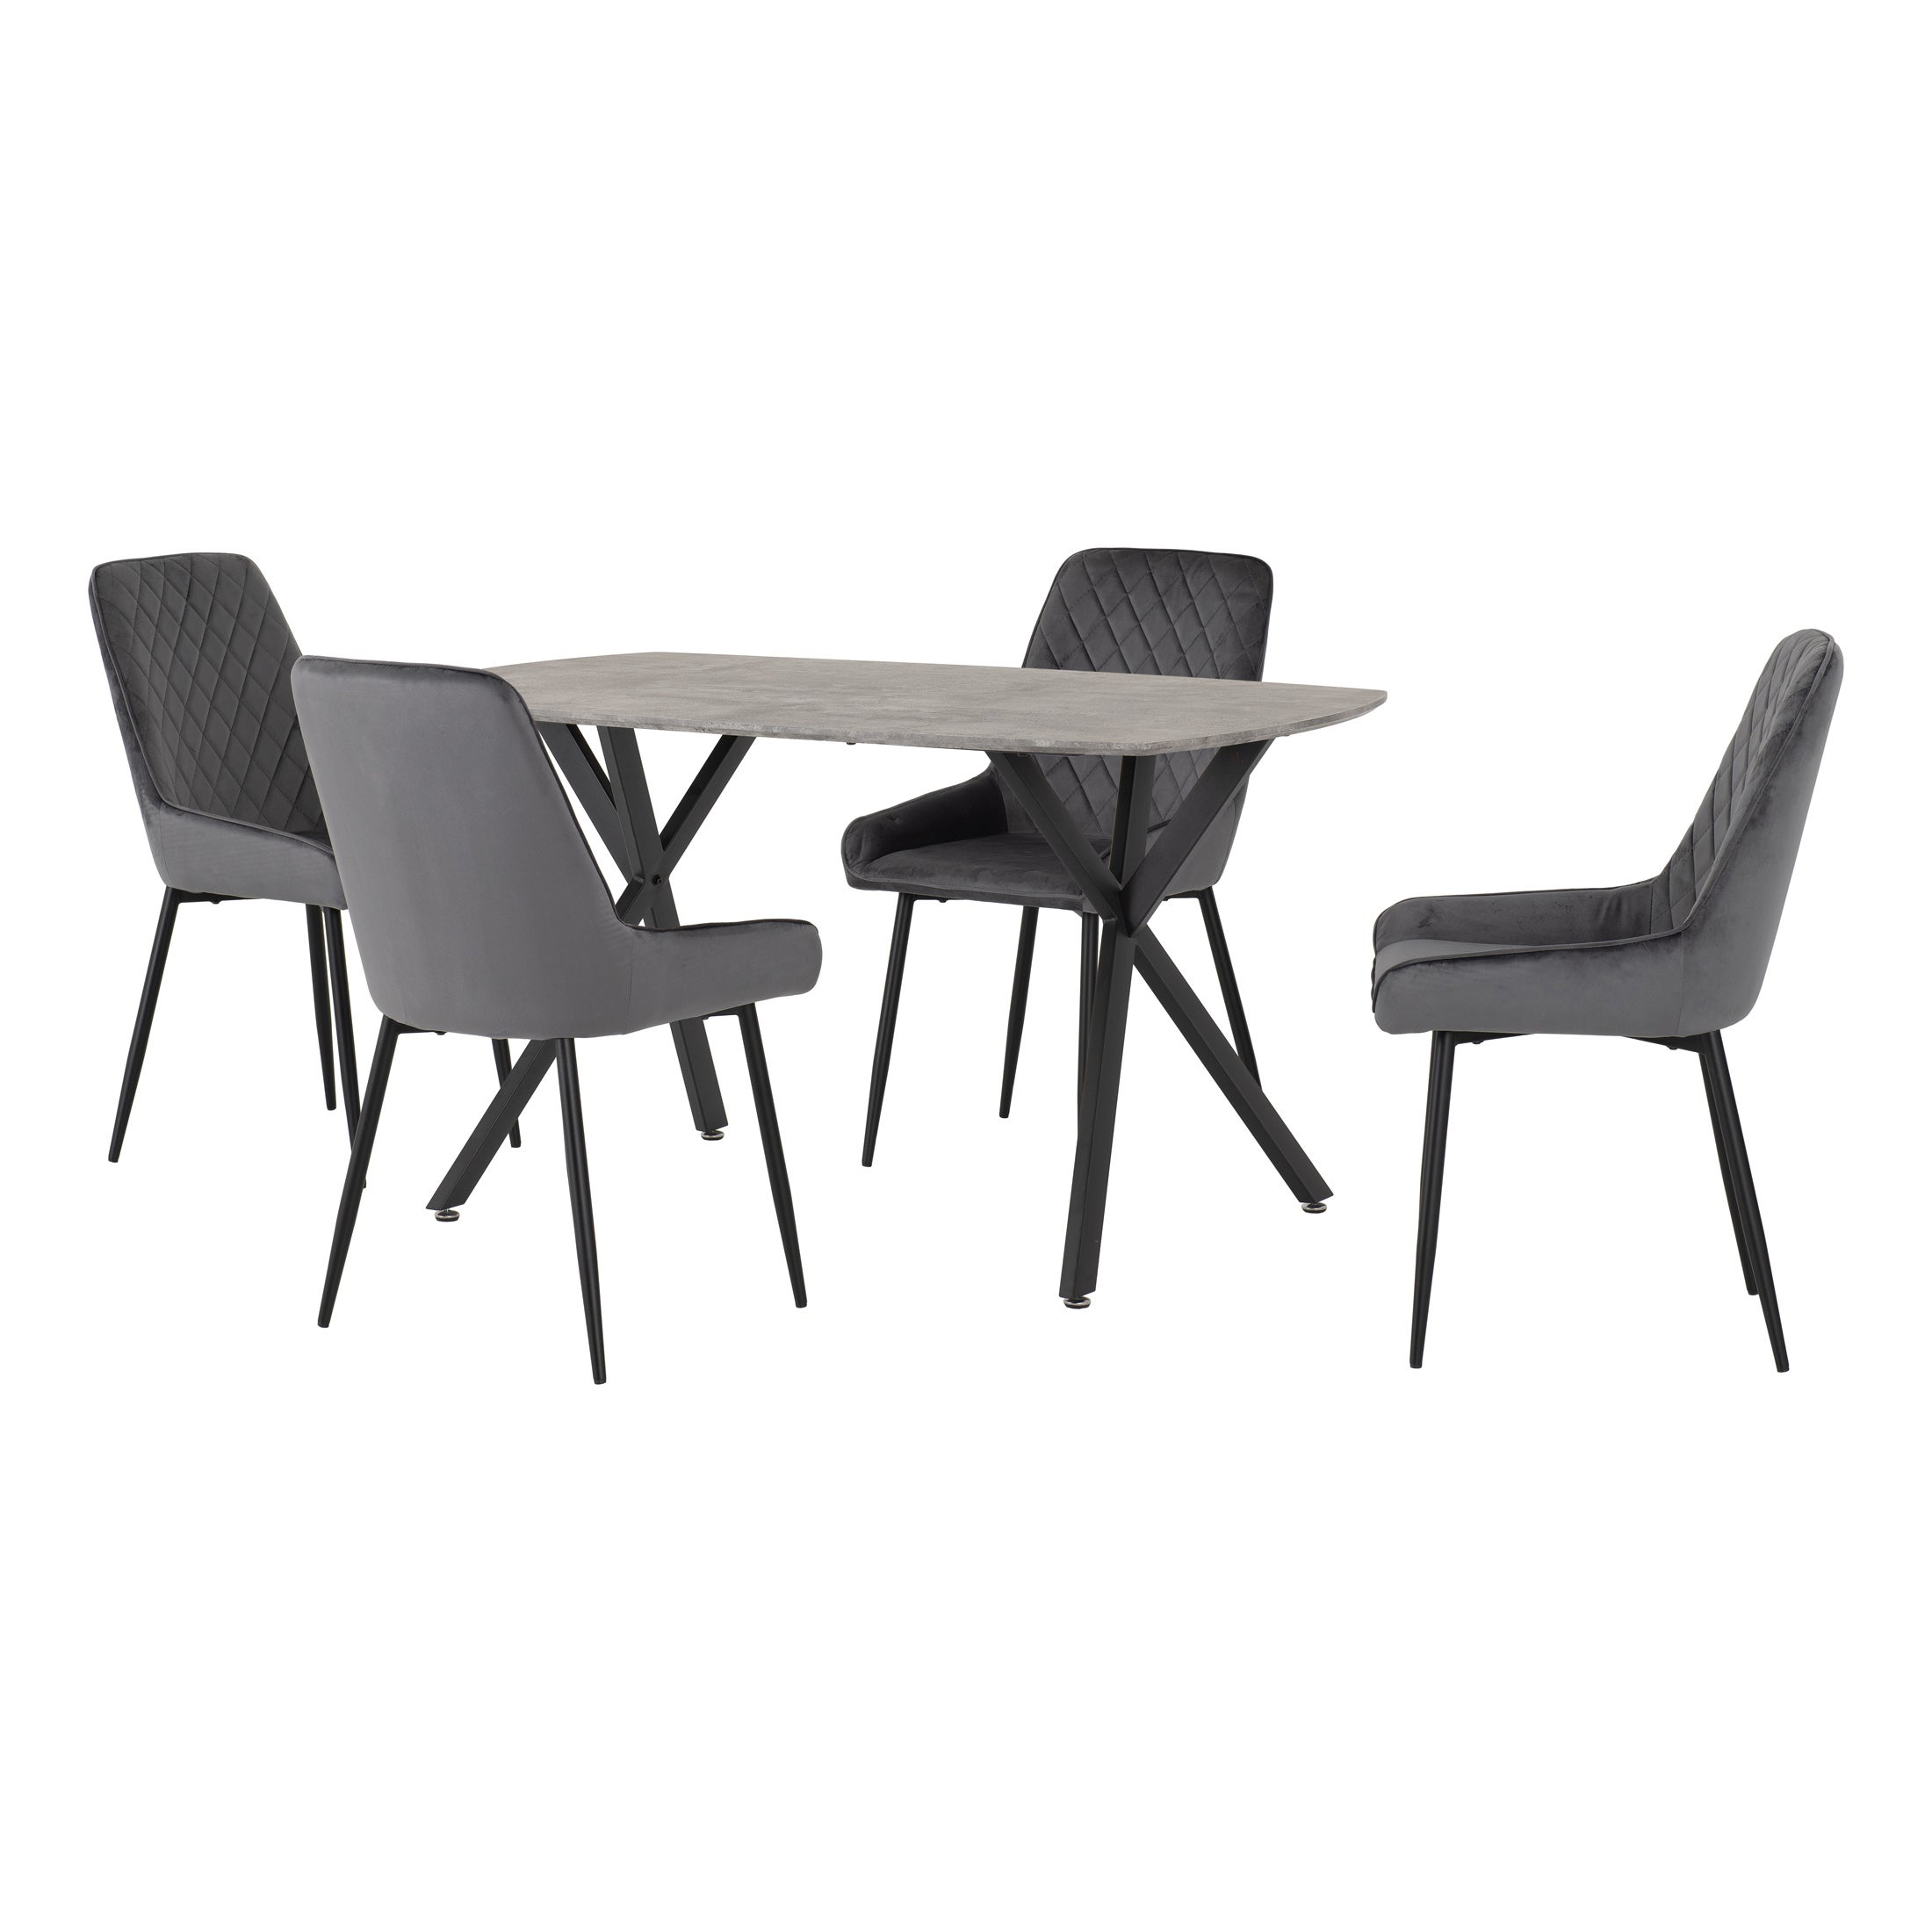 Athens Rectangular Dining Table With 4 Avery Chairs Concrete Effect Grey